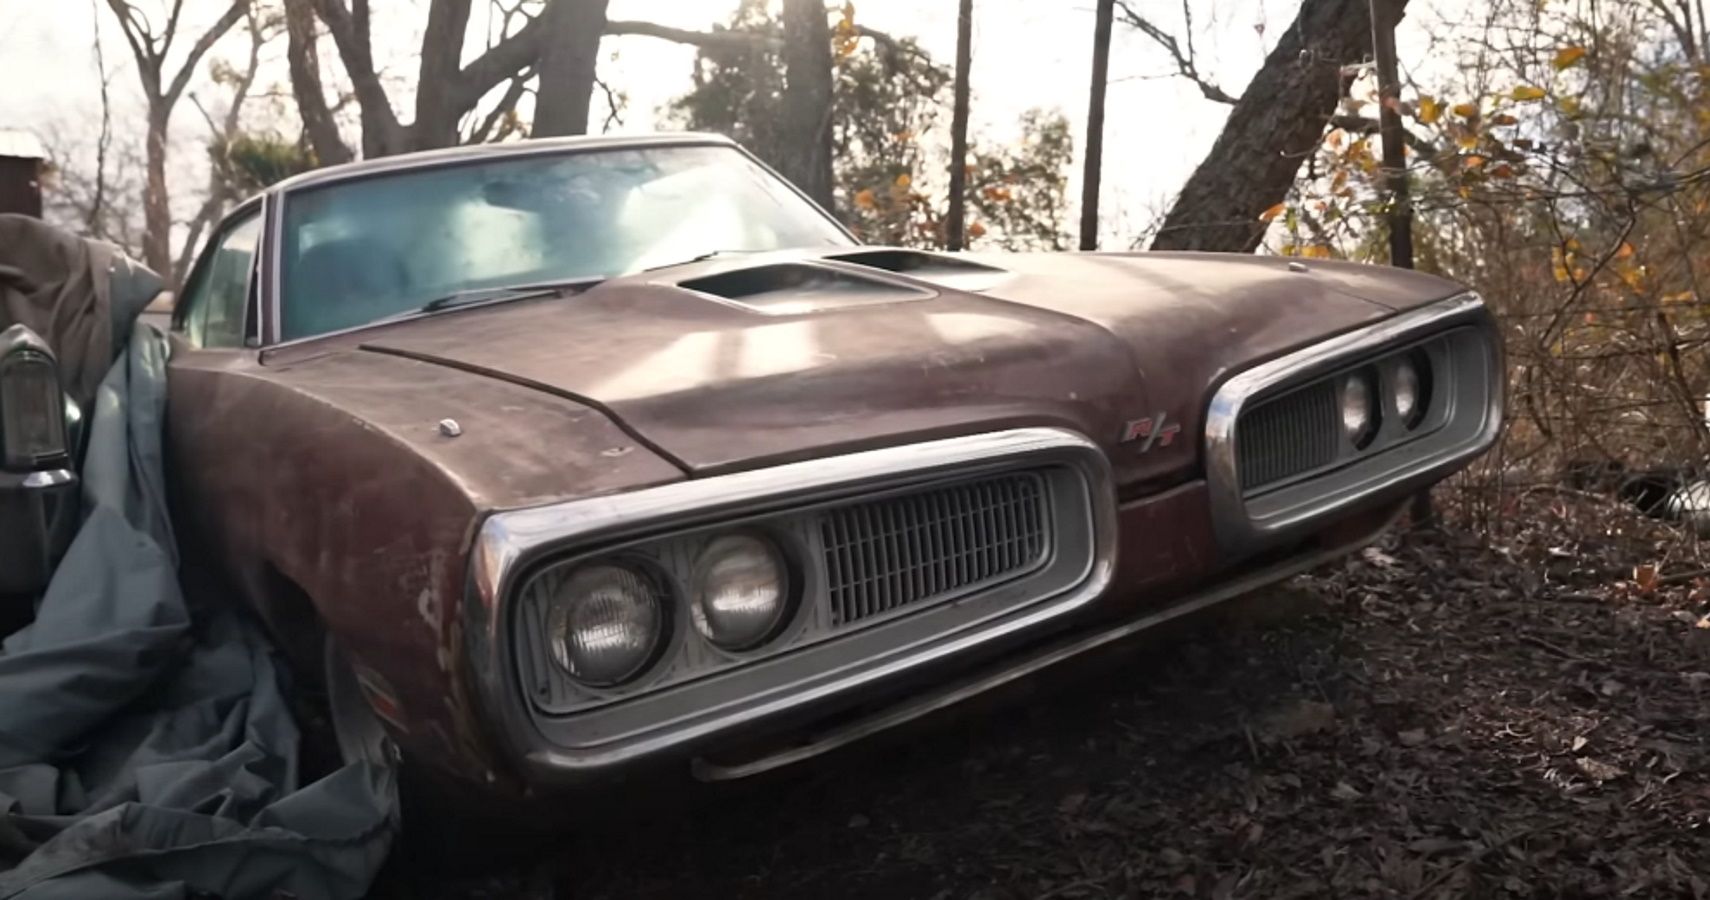 A 1970 Dodge Coronet RT waiting to be rescued